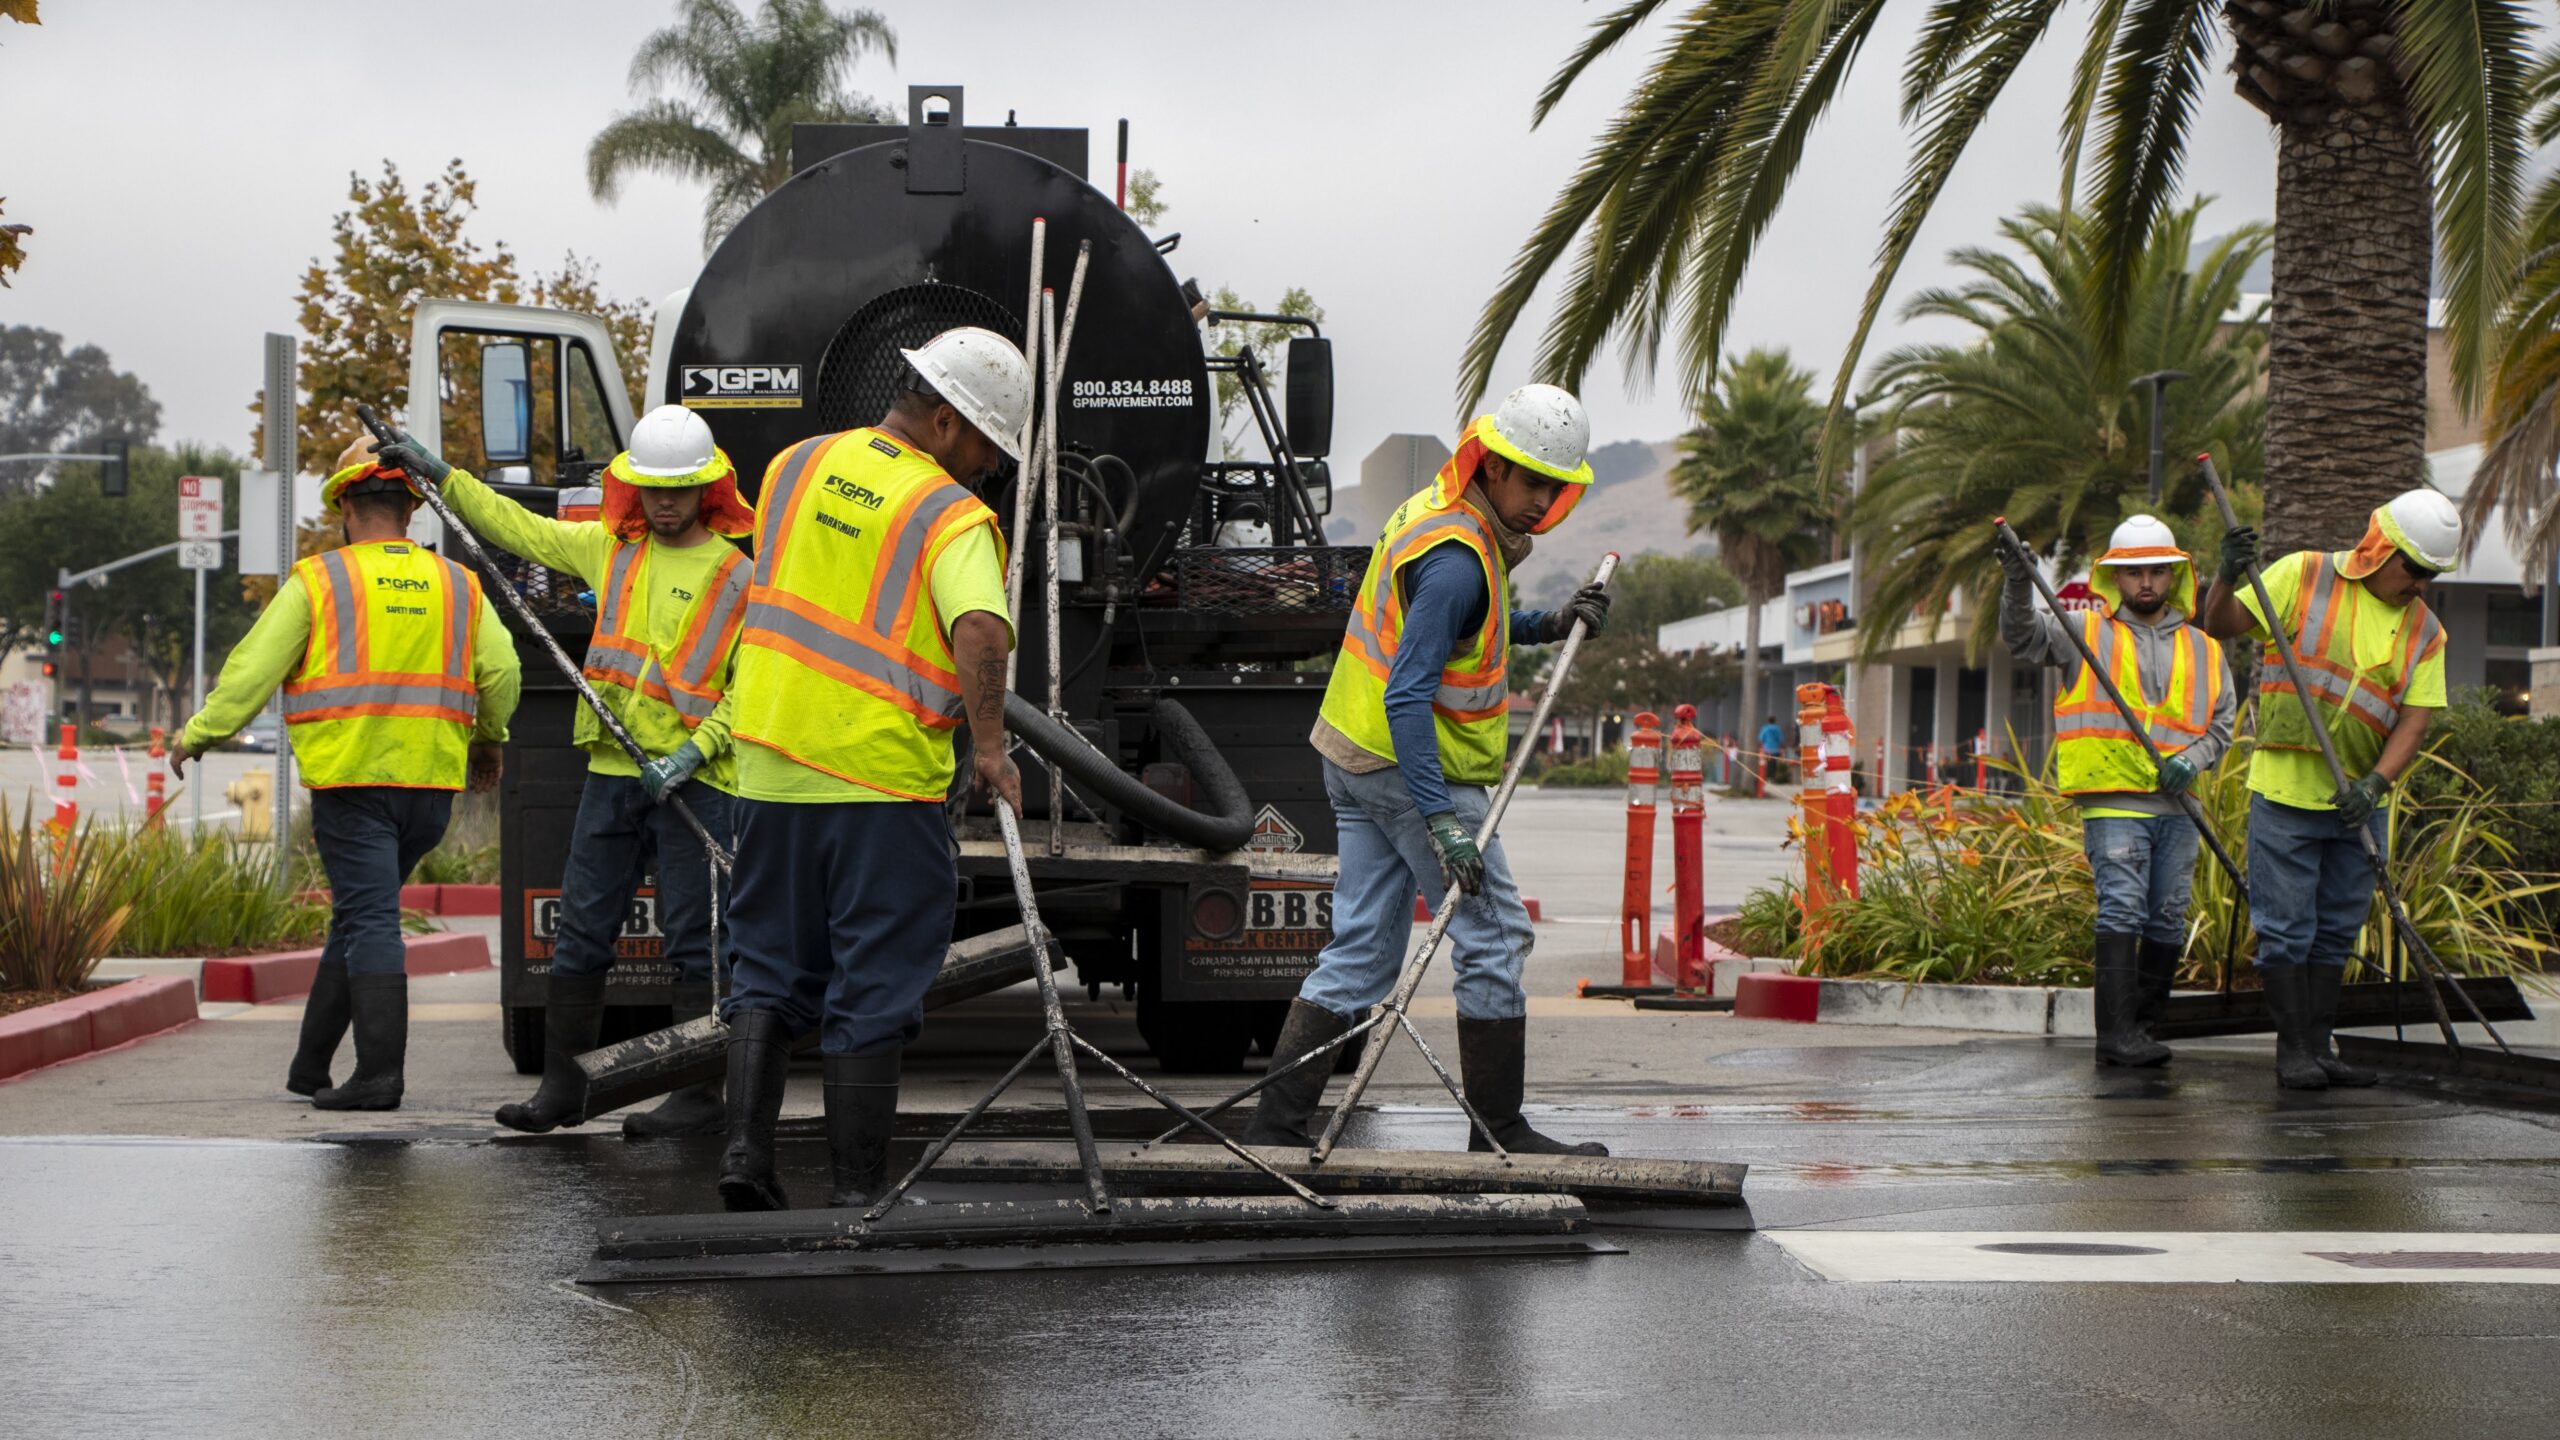 The crew of the top commercial paving company in Valencia, California, working on an asphalt installation project.